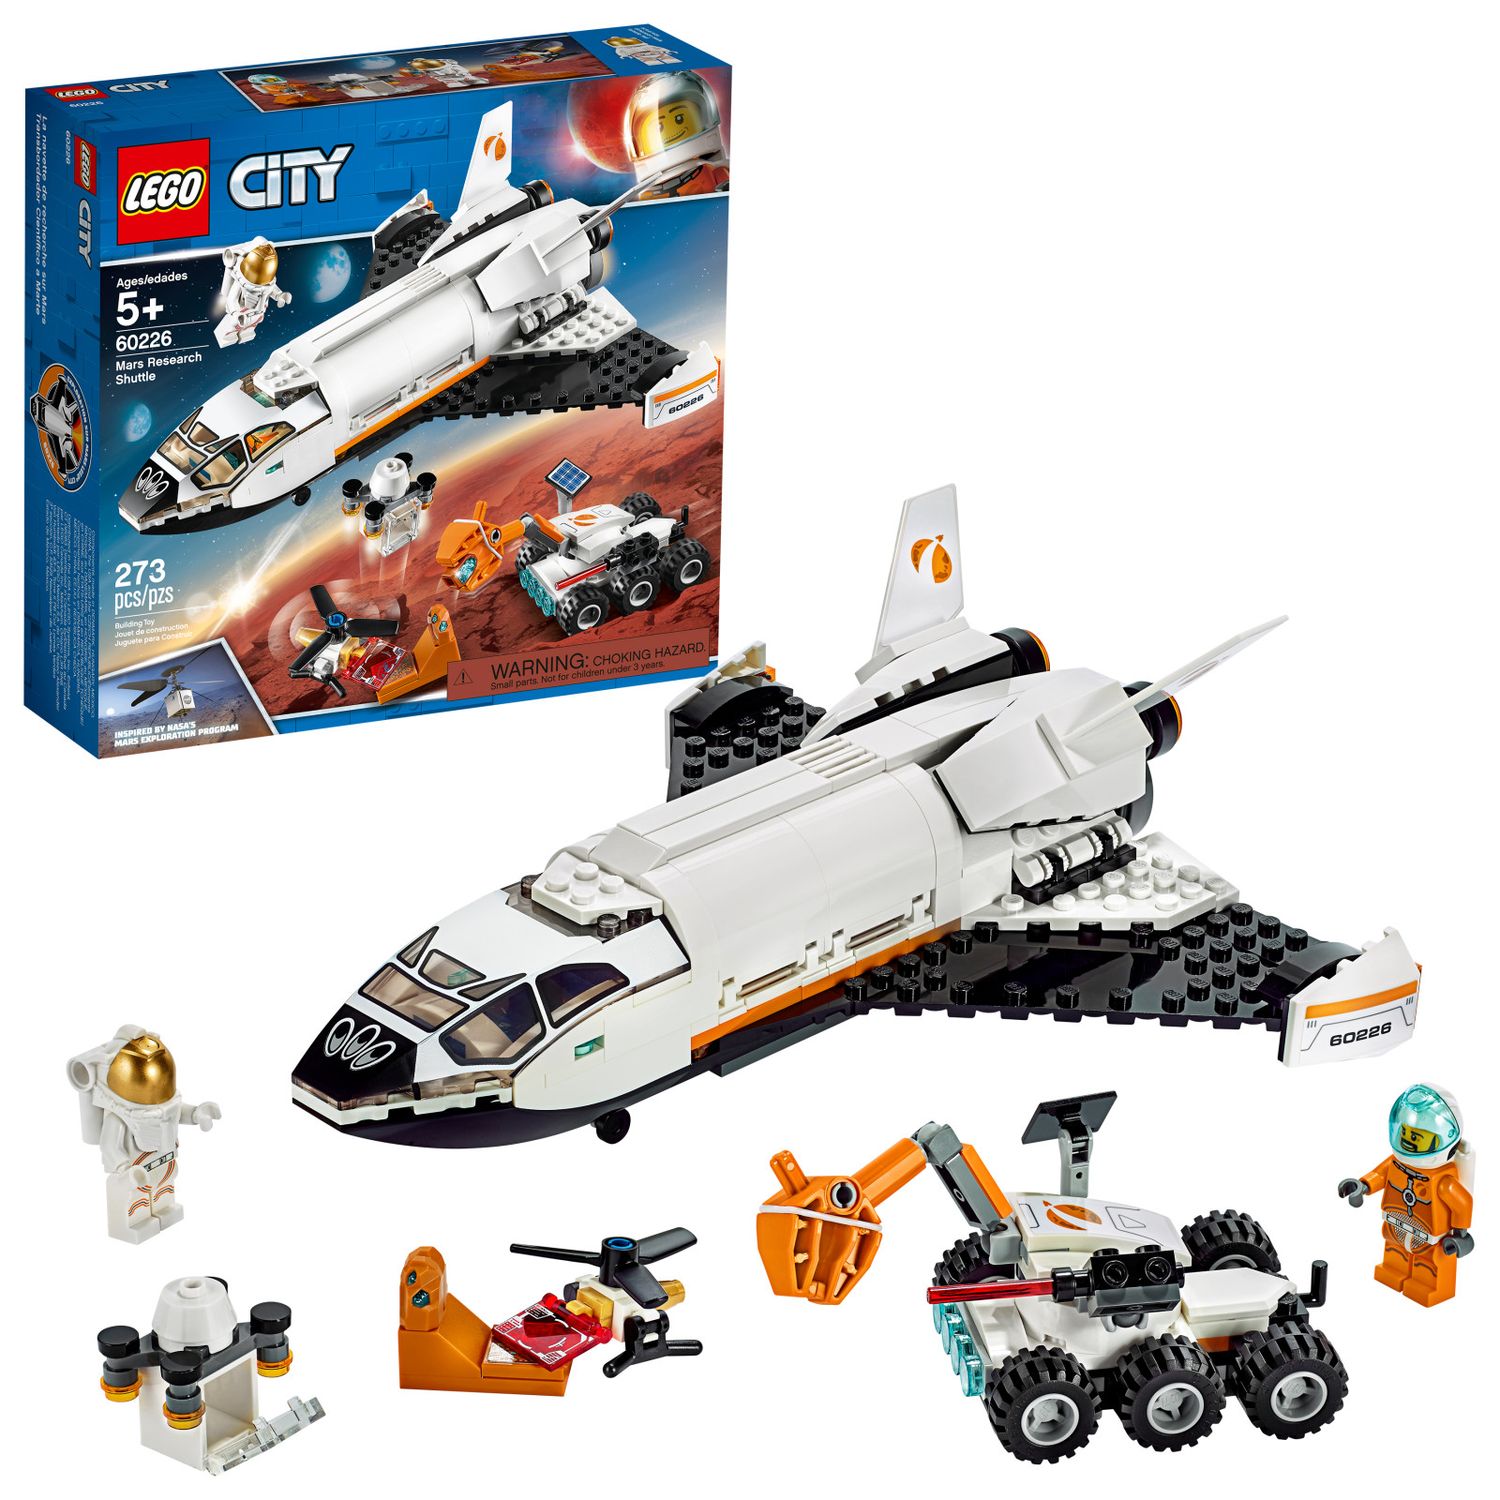 Image for LEGO City Space Port Mars Research Shuttle 60226 Set at Kohl's.